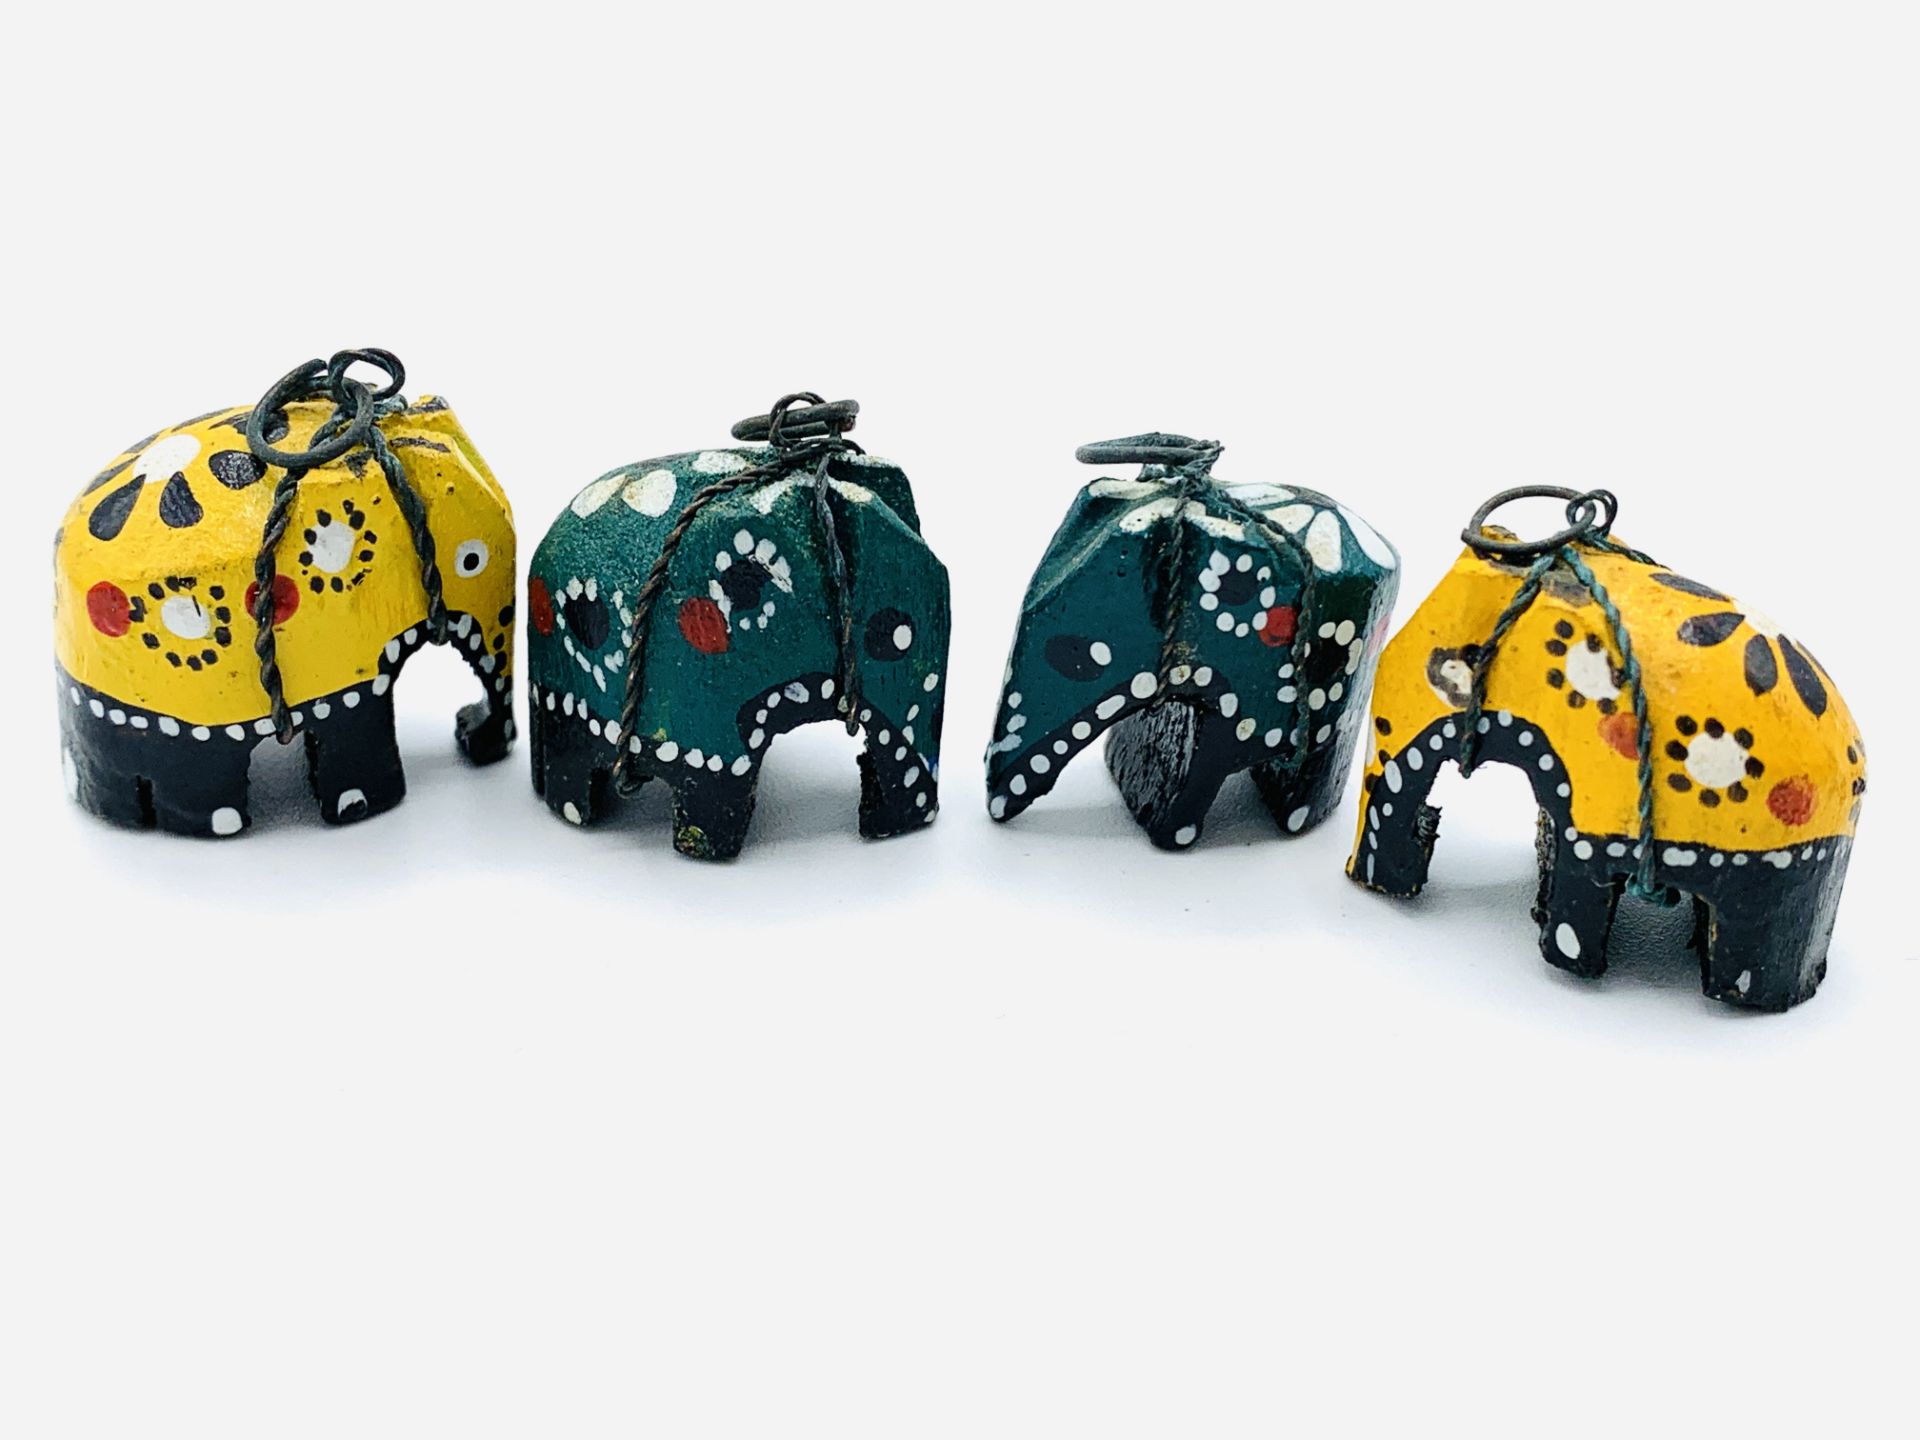 Four carved wooden elephants together with four metal rings.